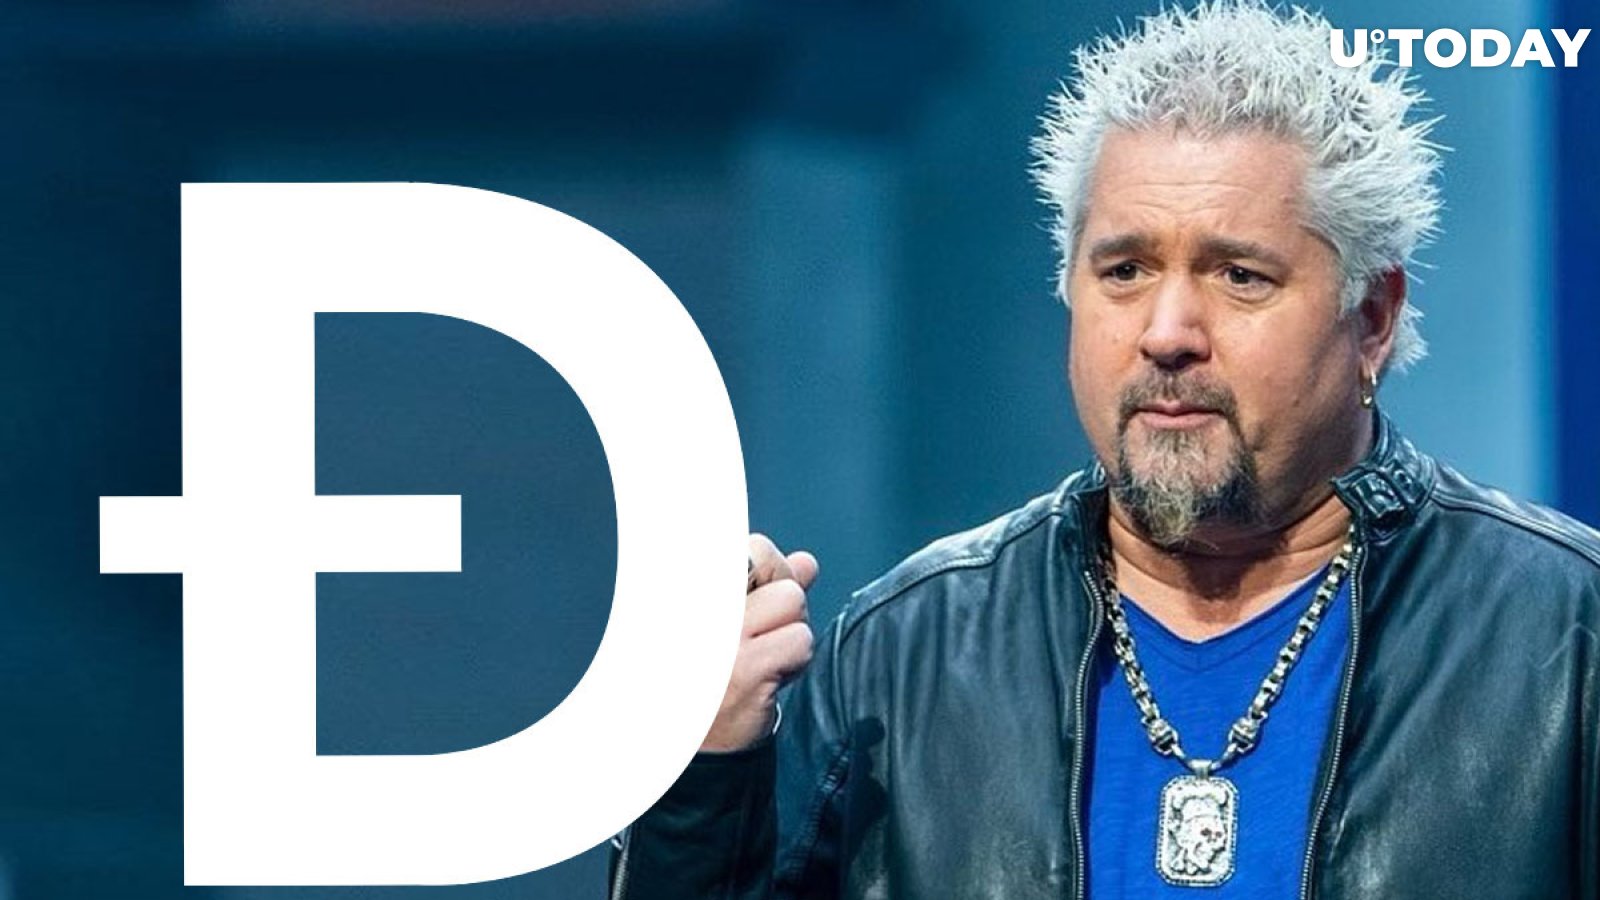 Dogecoin's Daily Trading Volume Surpasses $4.5 Billion as Guy Fieri Joins List of Supporters